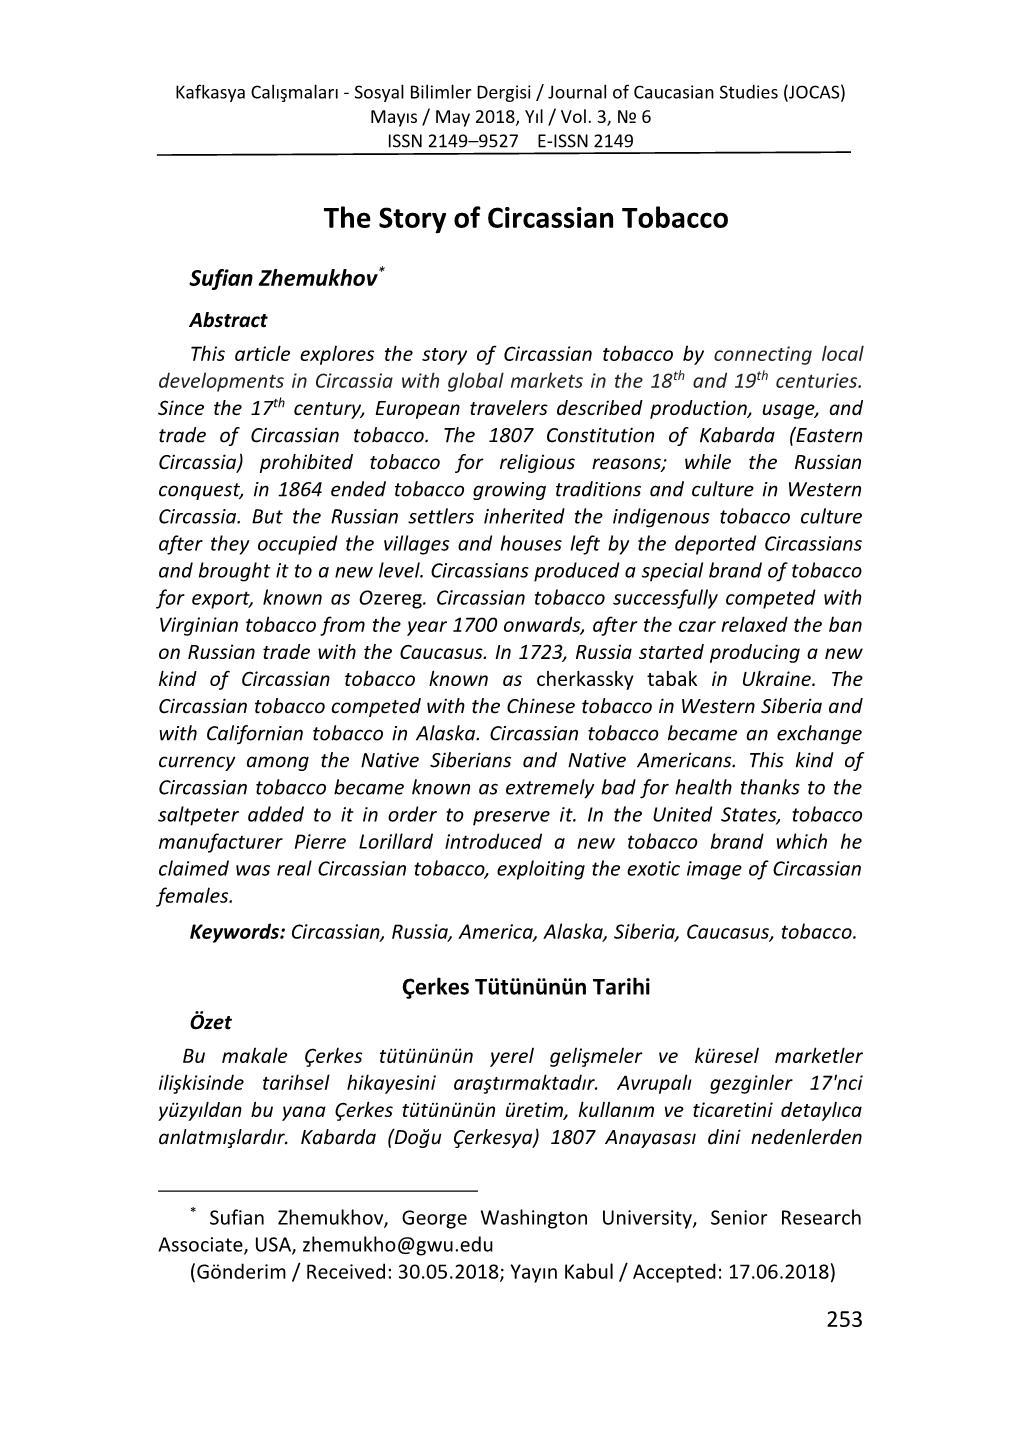 The Story of Circassian Tobacco